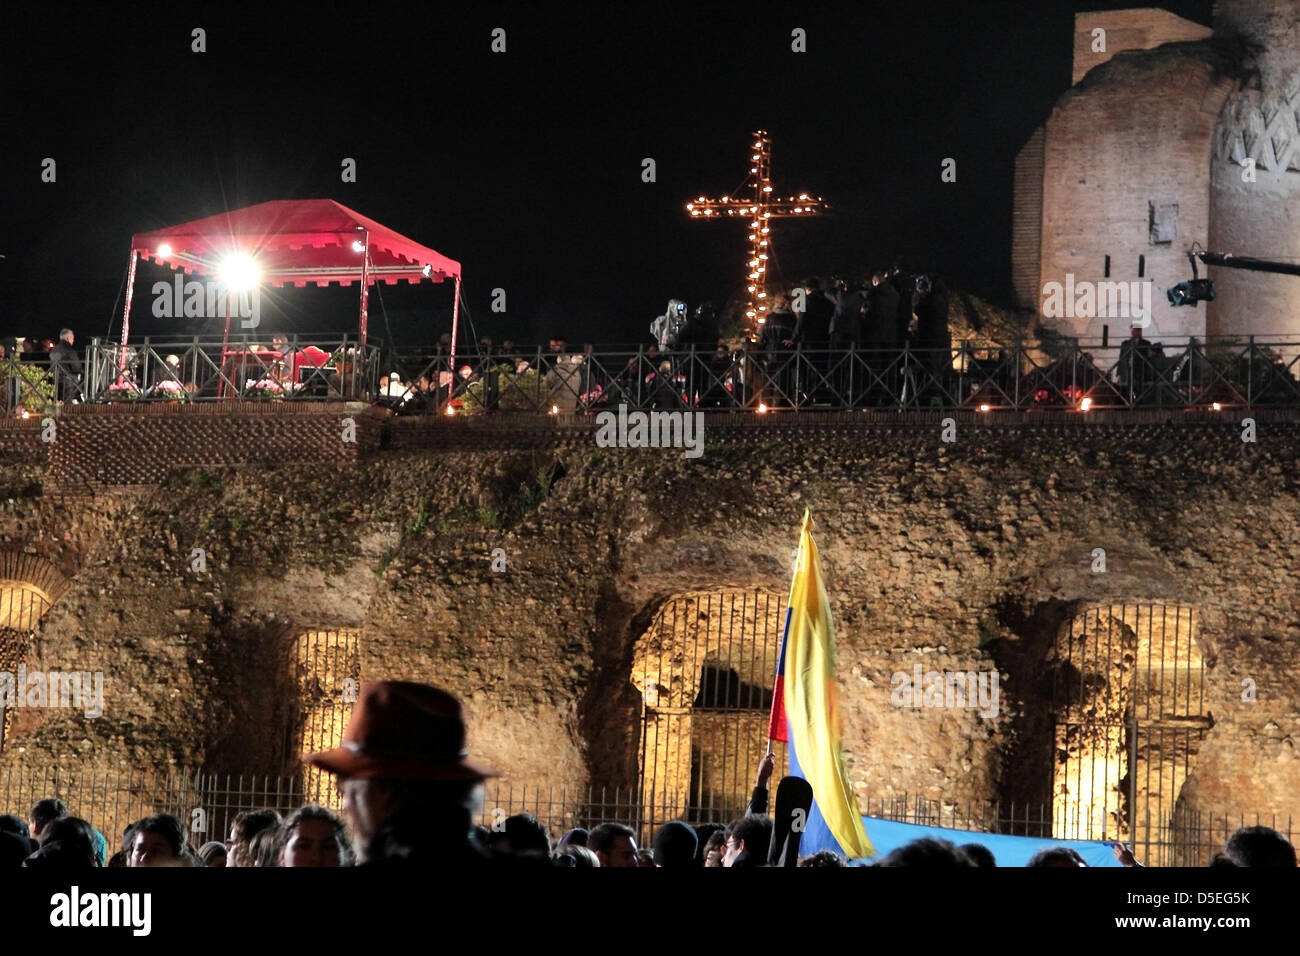 29th March 2013, Colosseum Square, Rome: The cross and the canopy set up for the Pope Francis I for the Stations of the Cross around the coliseum on Good Friday. Stock Photo